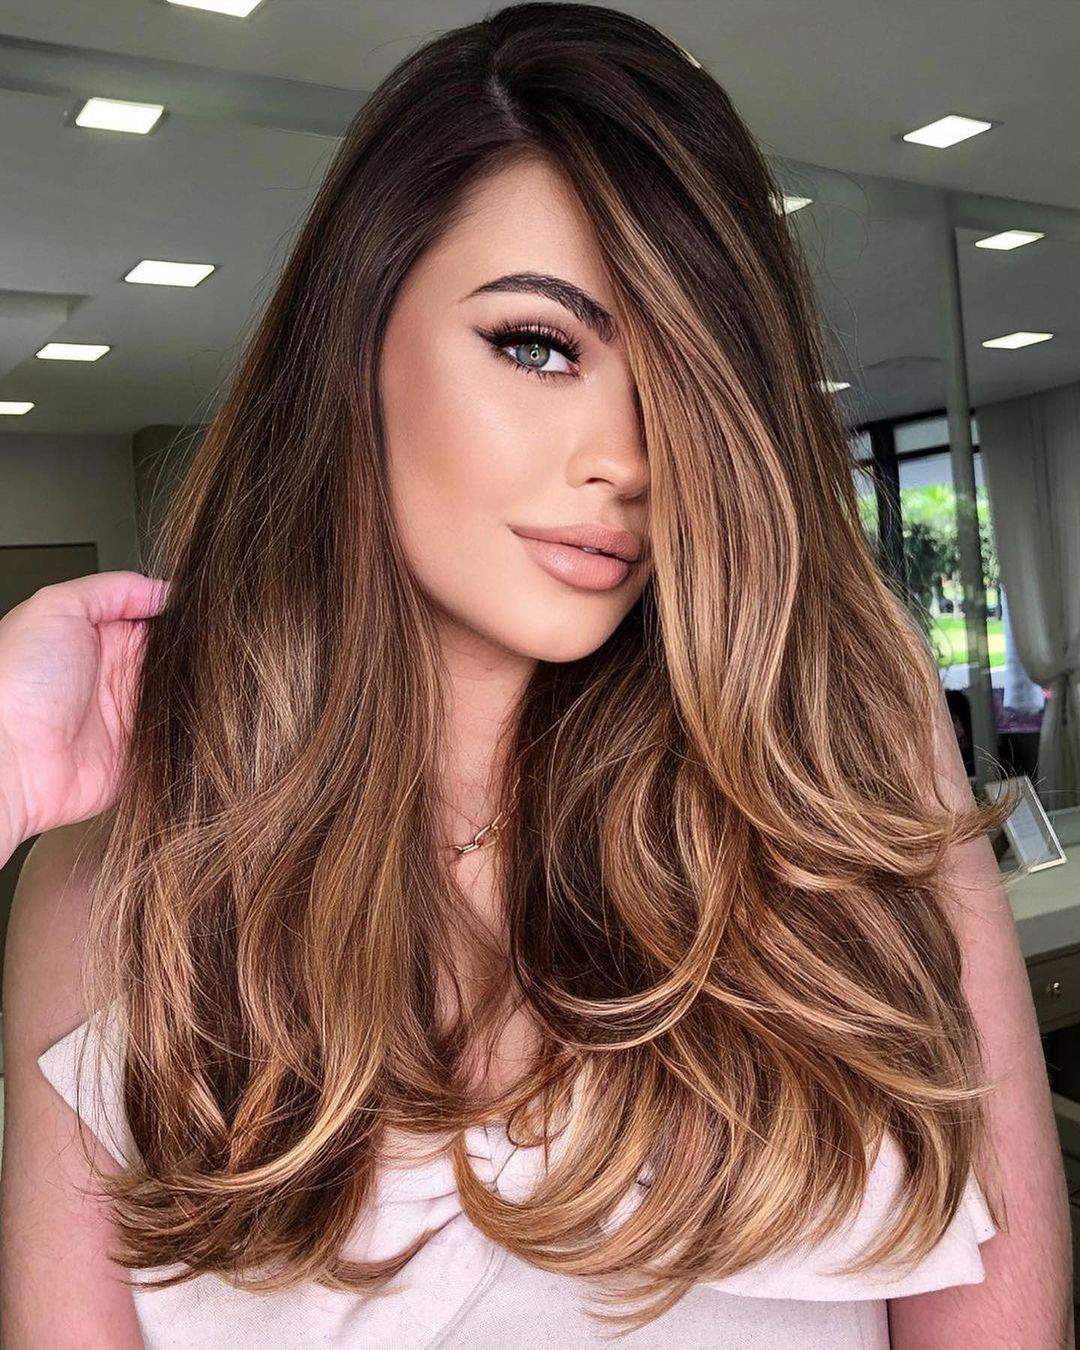 100+ Trendy Hairstyle Ideas For Women To Try In 2021 images 47